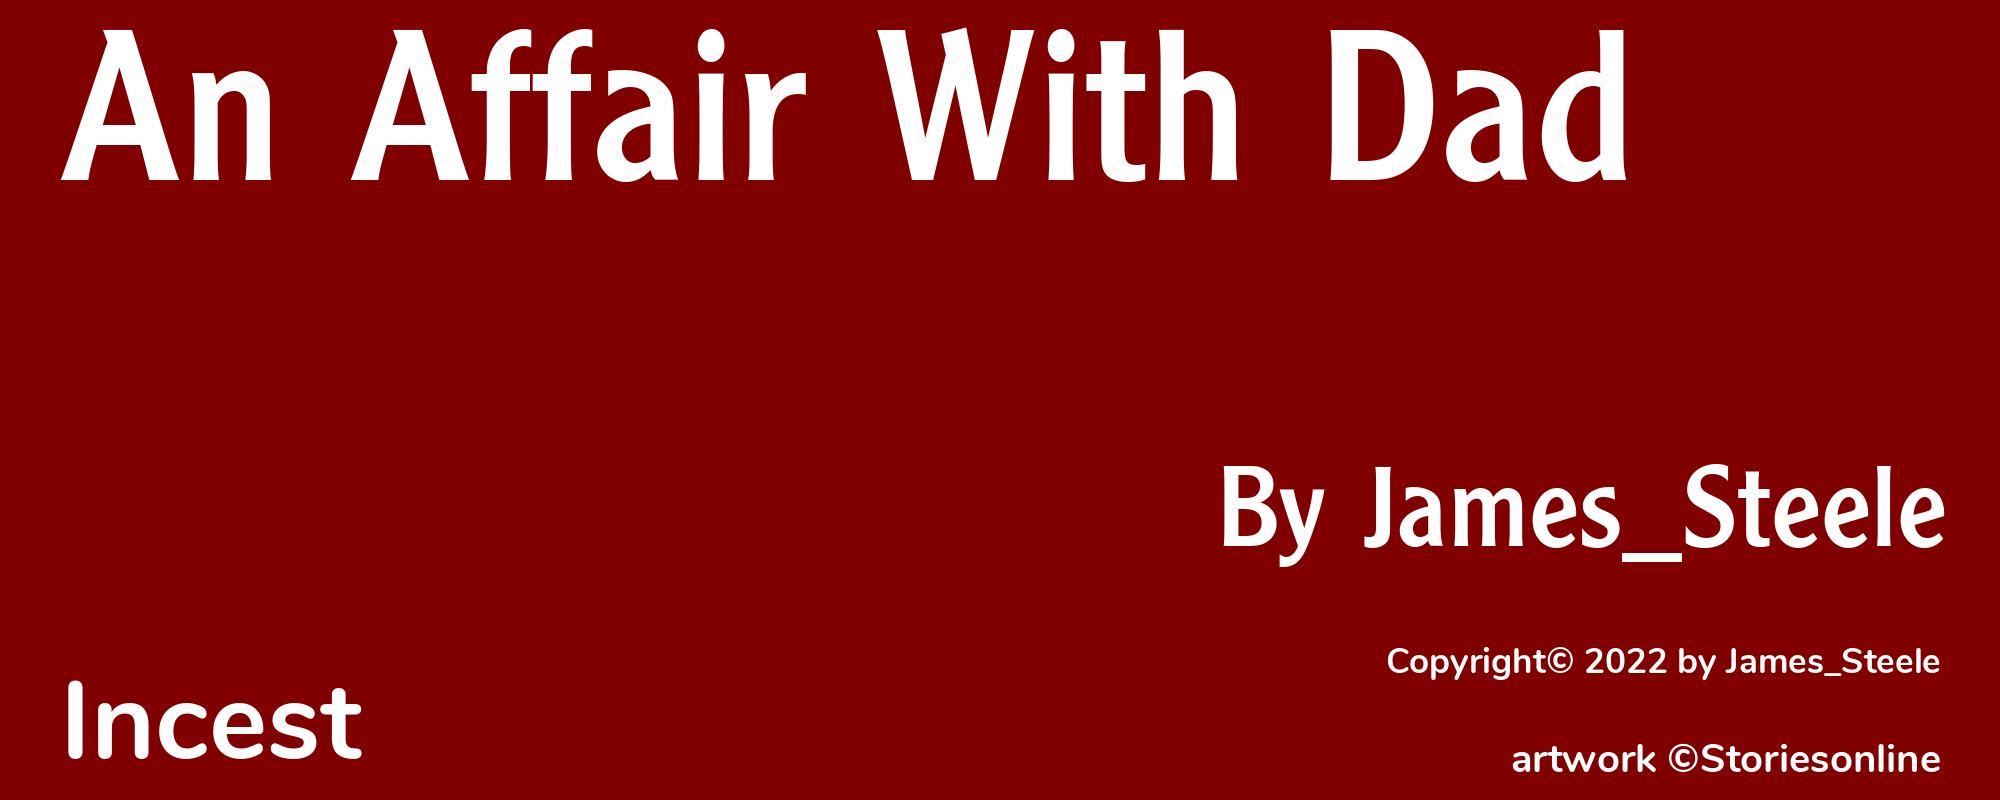 An Affair With Dad - Cover